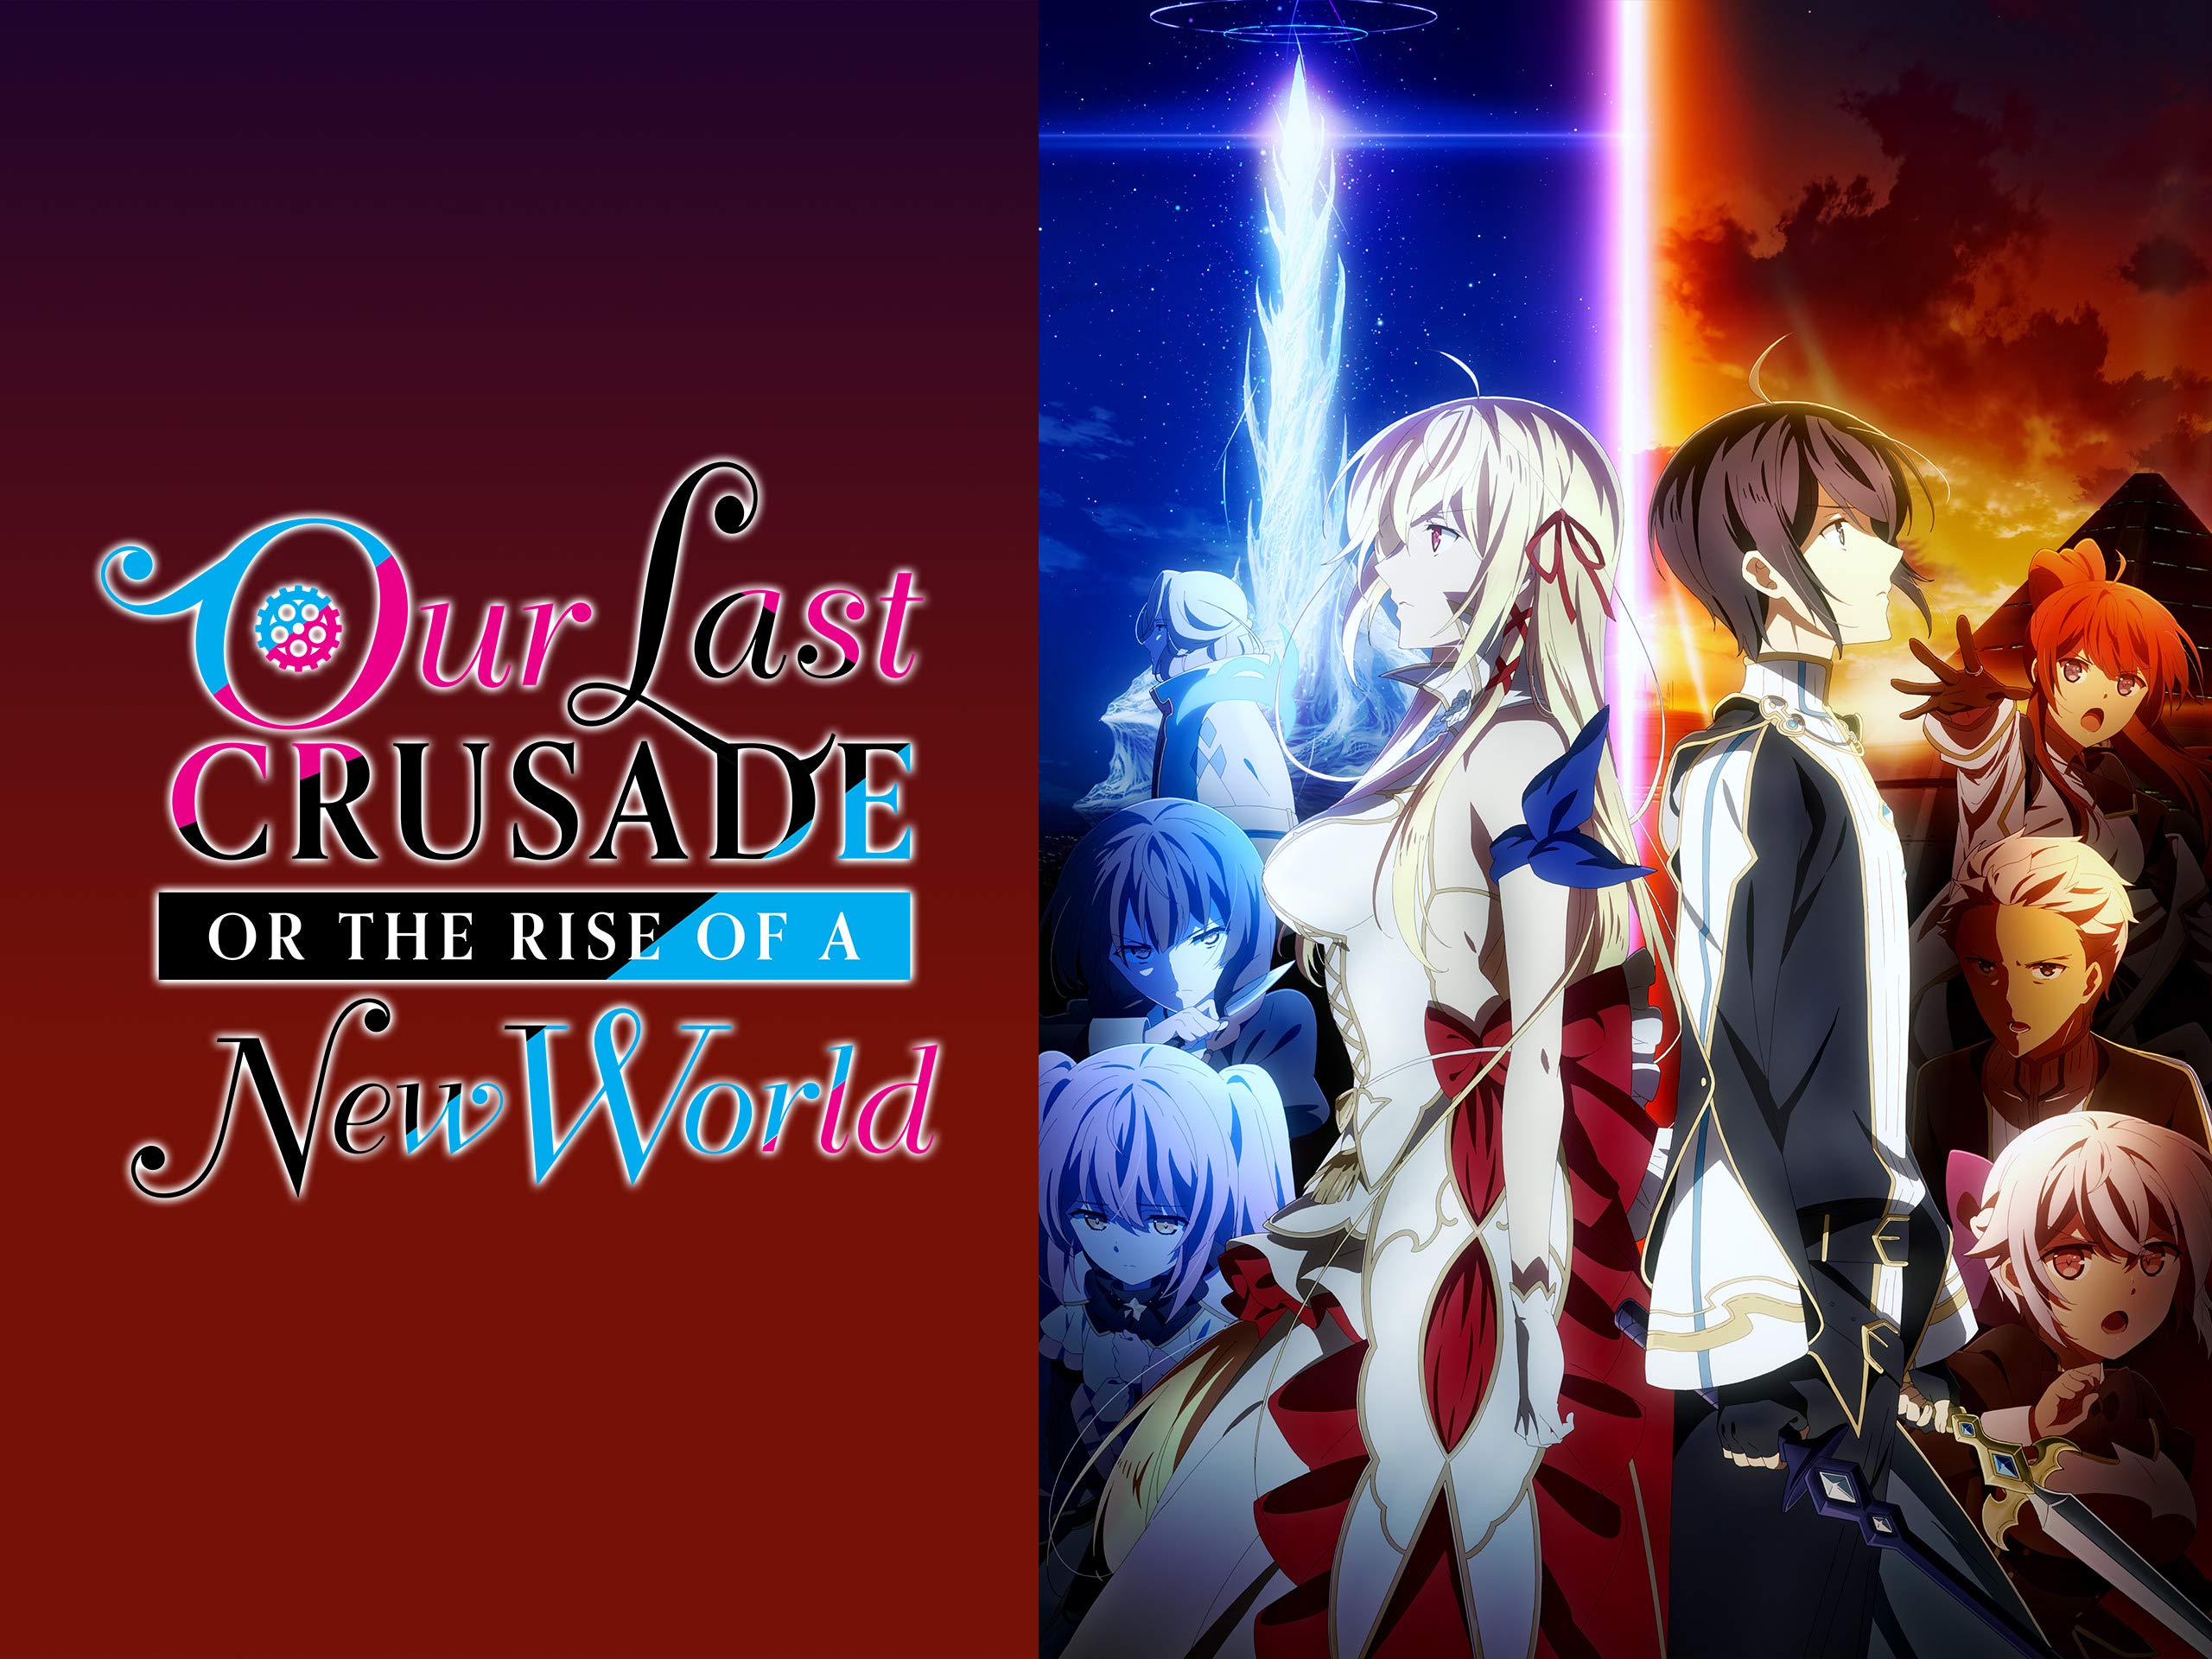 Watch Our Last Crusade or Rise of the New World (Original Japanese Version)